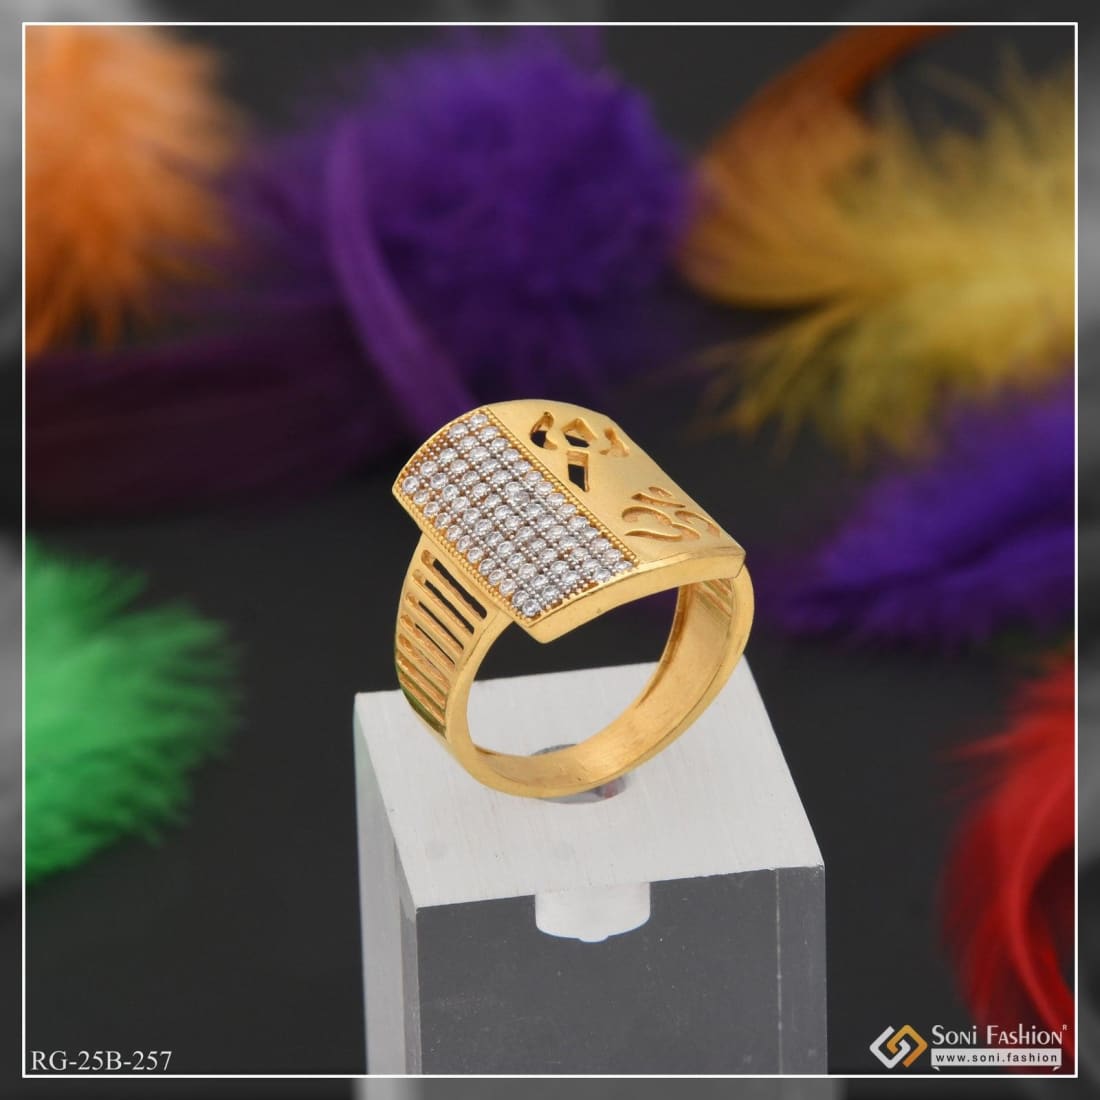 Factory Direct Best Selling Gold Ring| Alibaba.com